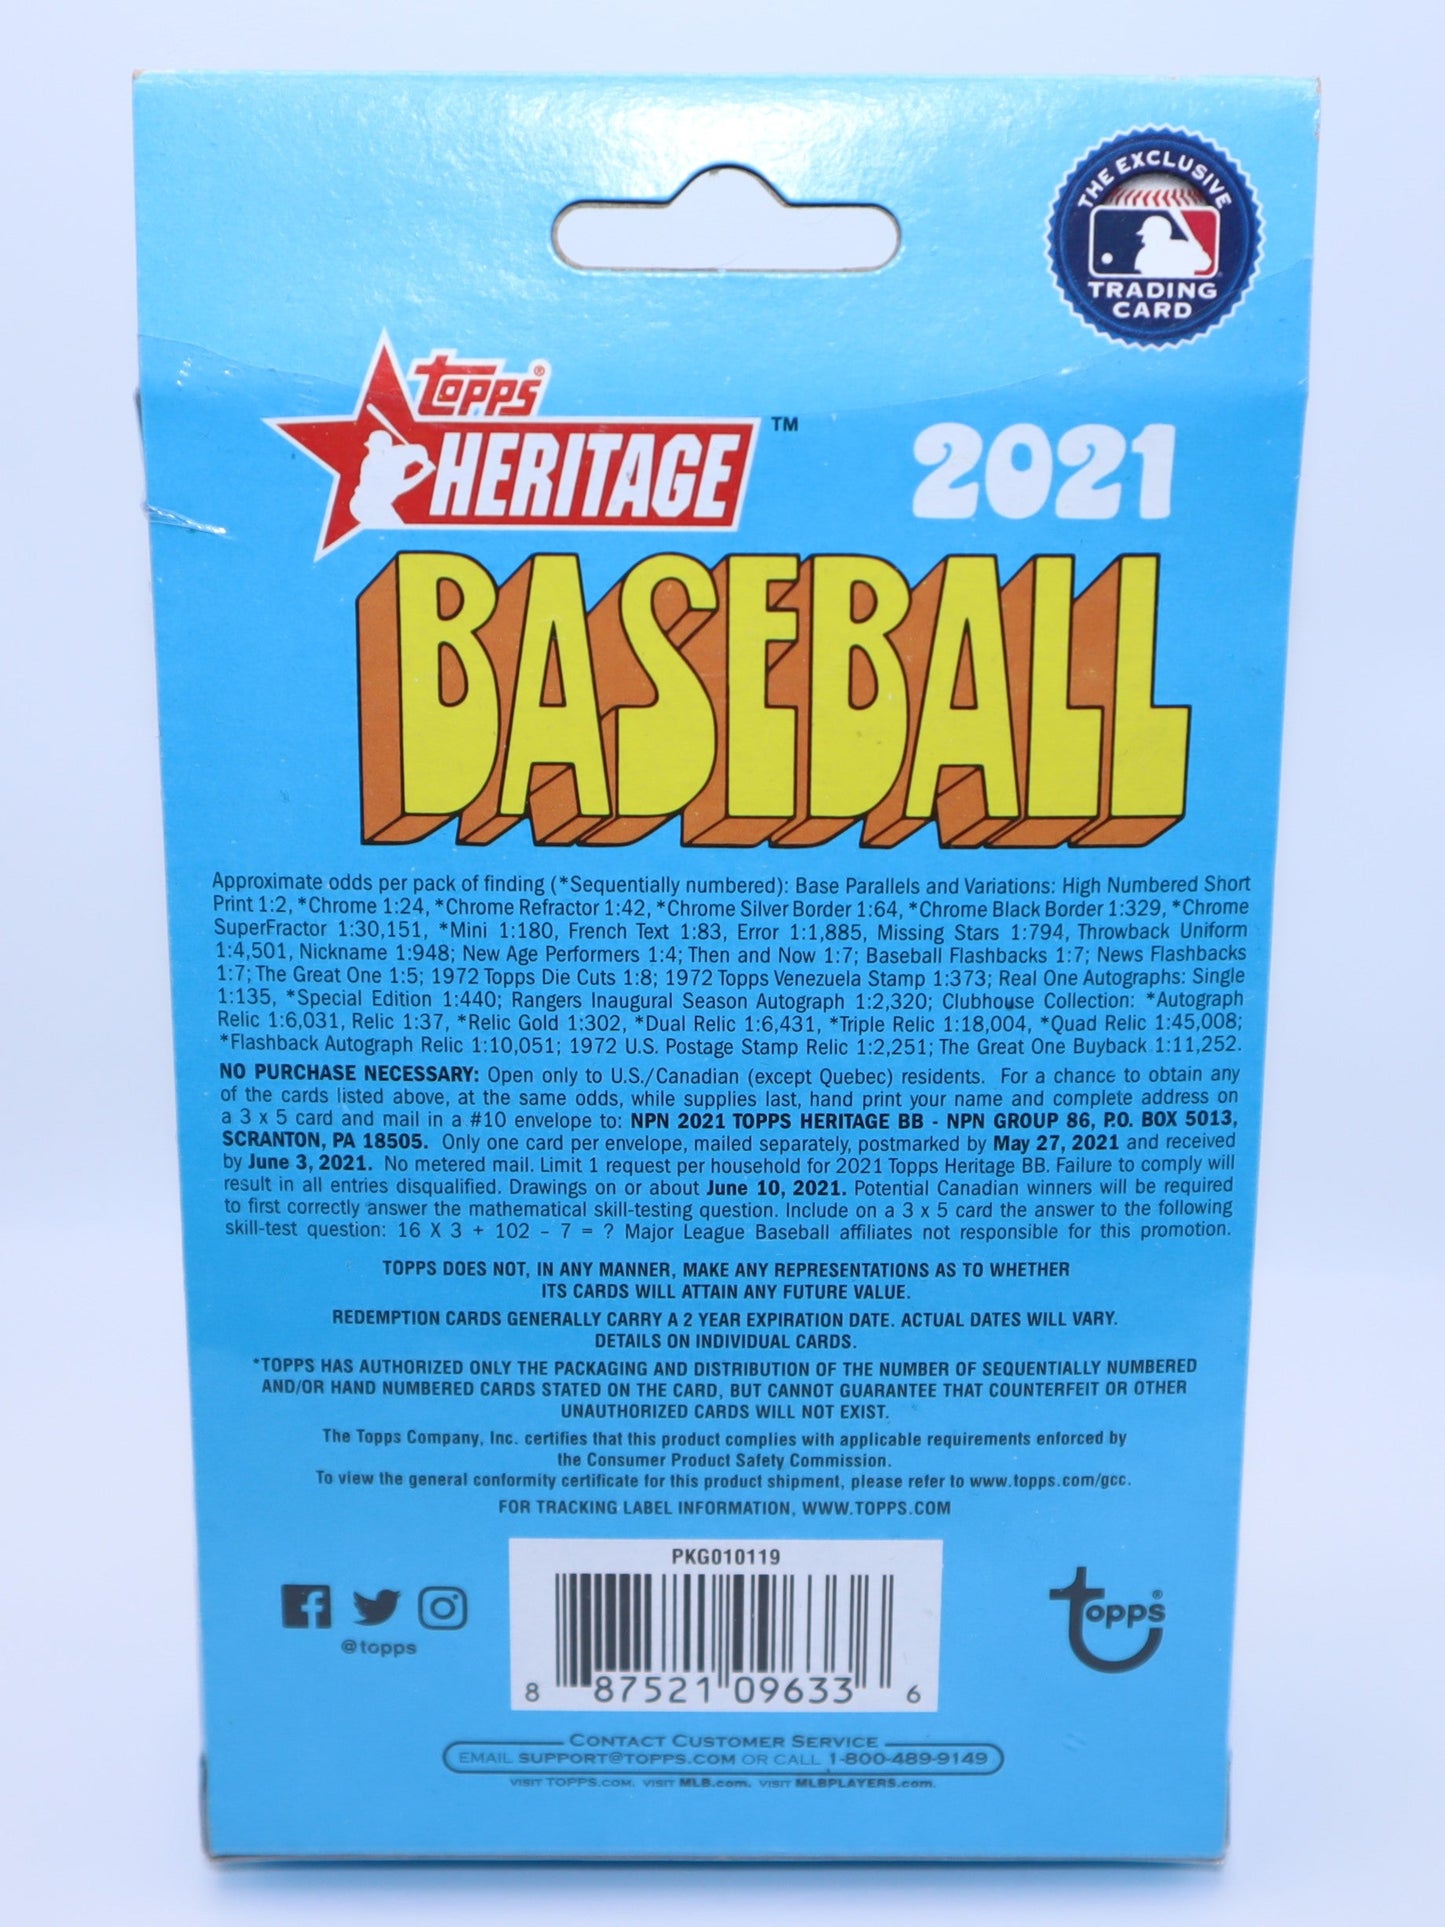 2021 Topps Heritage Baseball Cards TARGET Exclusive Hanger Box - Collectibles